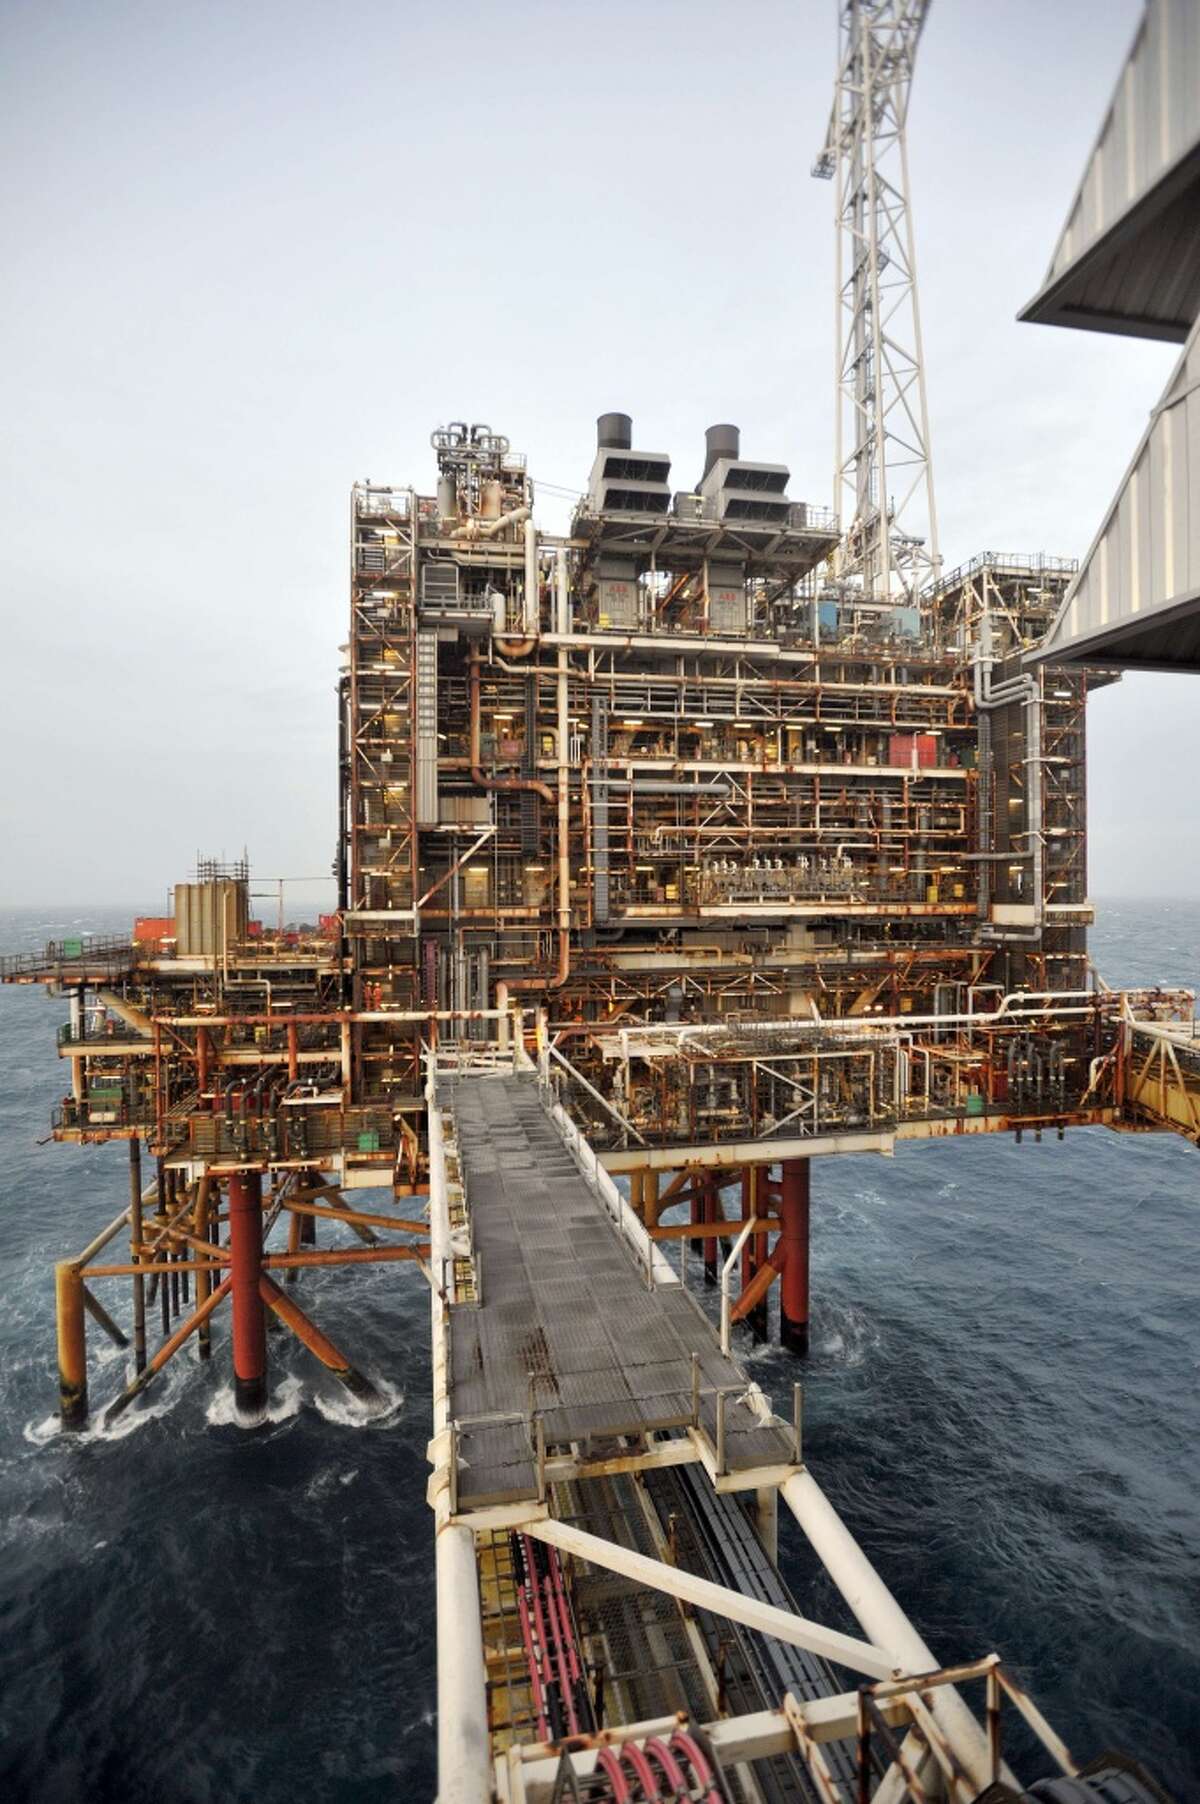 A picture dated February 24, 2014 shows section of the BP ETAP (Eastern Trough Area Project) oil platform in the North Sea, around 100 miles east of Aberdeen, Scotland. Oil is at the heart of the debate over whether Scotland can afford to go it alone or would be better off remaining part of Britain on September 18 -- and booming Aberdeen demonstrates how wealthy it has made some.